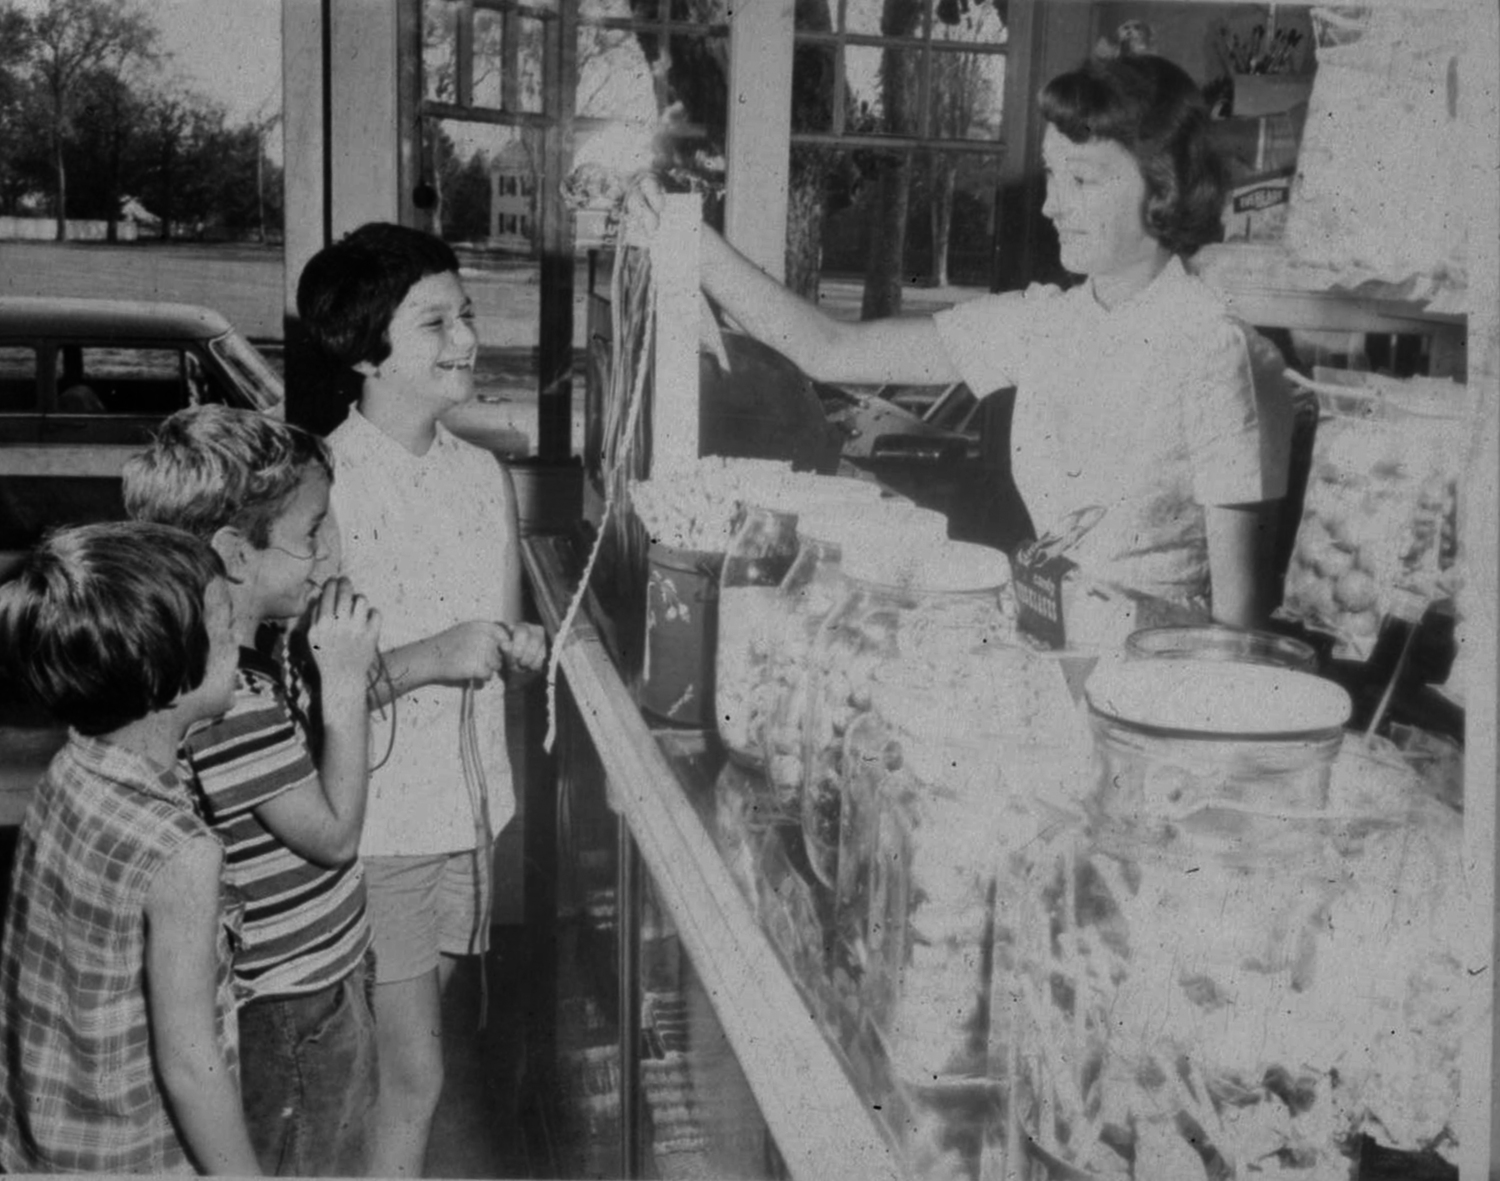 June Morris hands out candy to children at the Penny Candy Shop in the early 1960s.